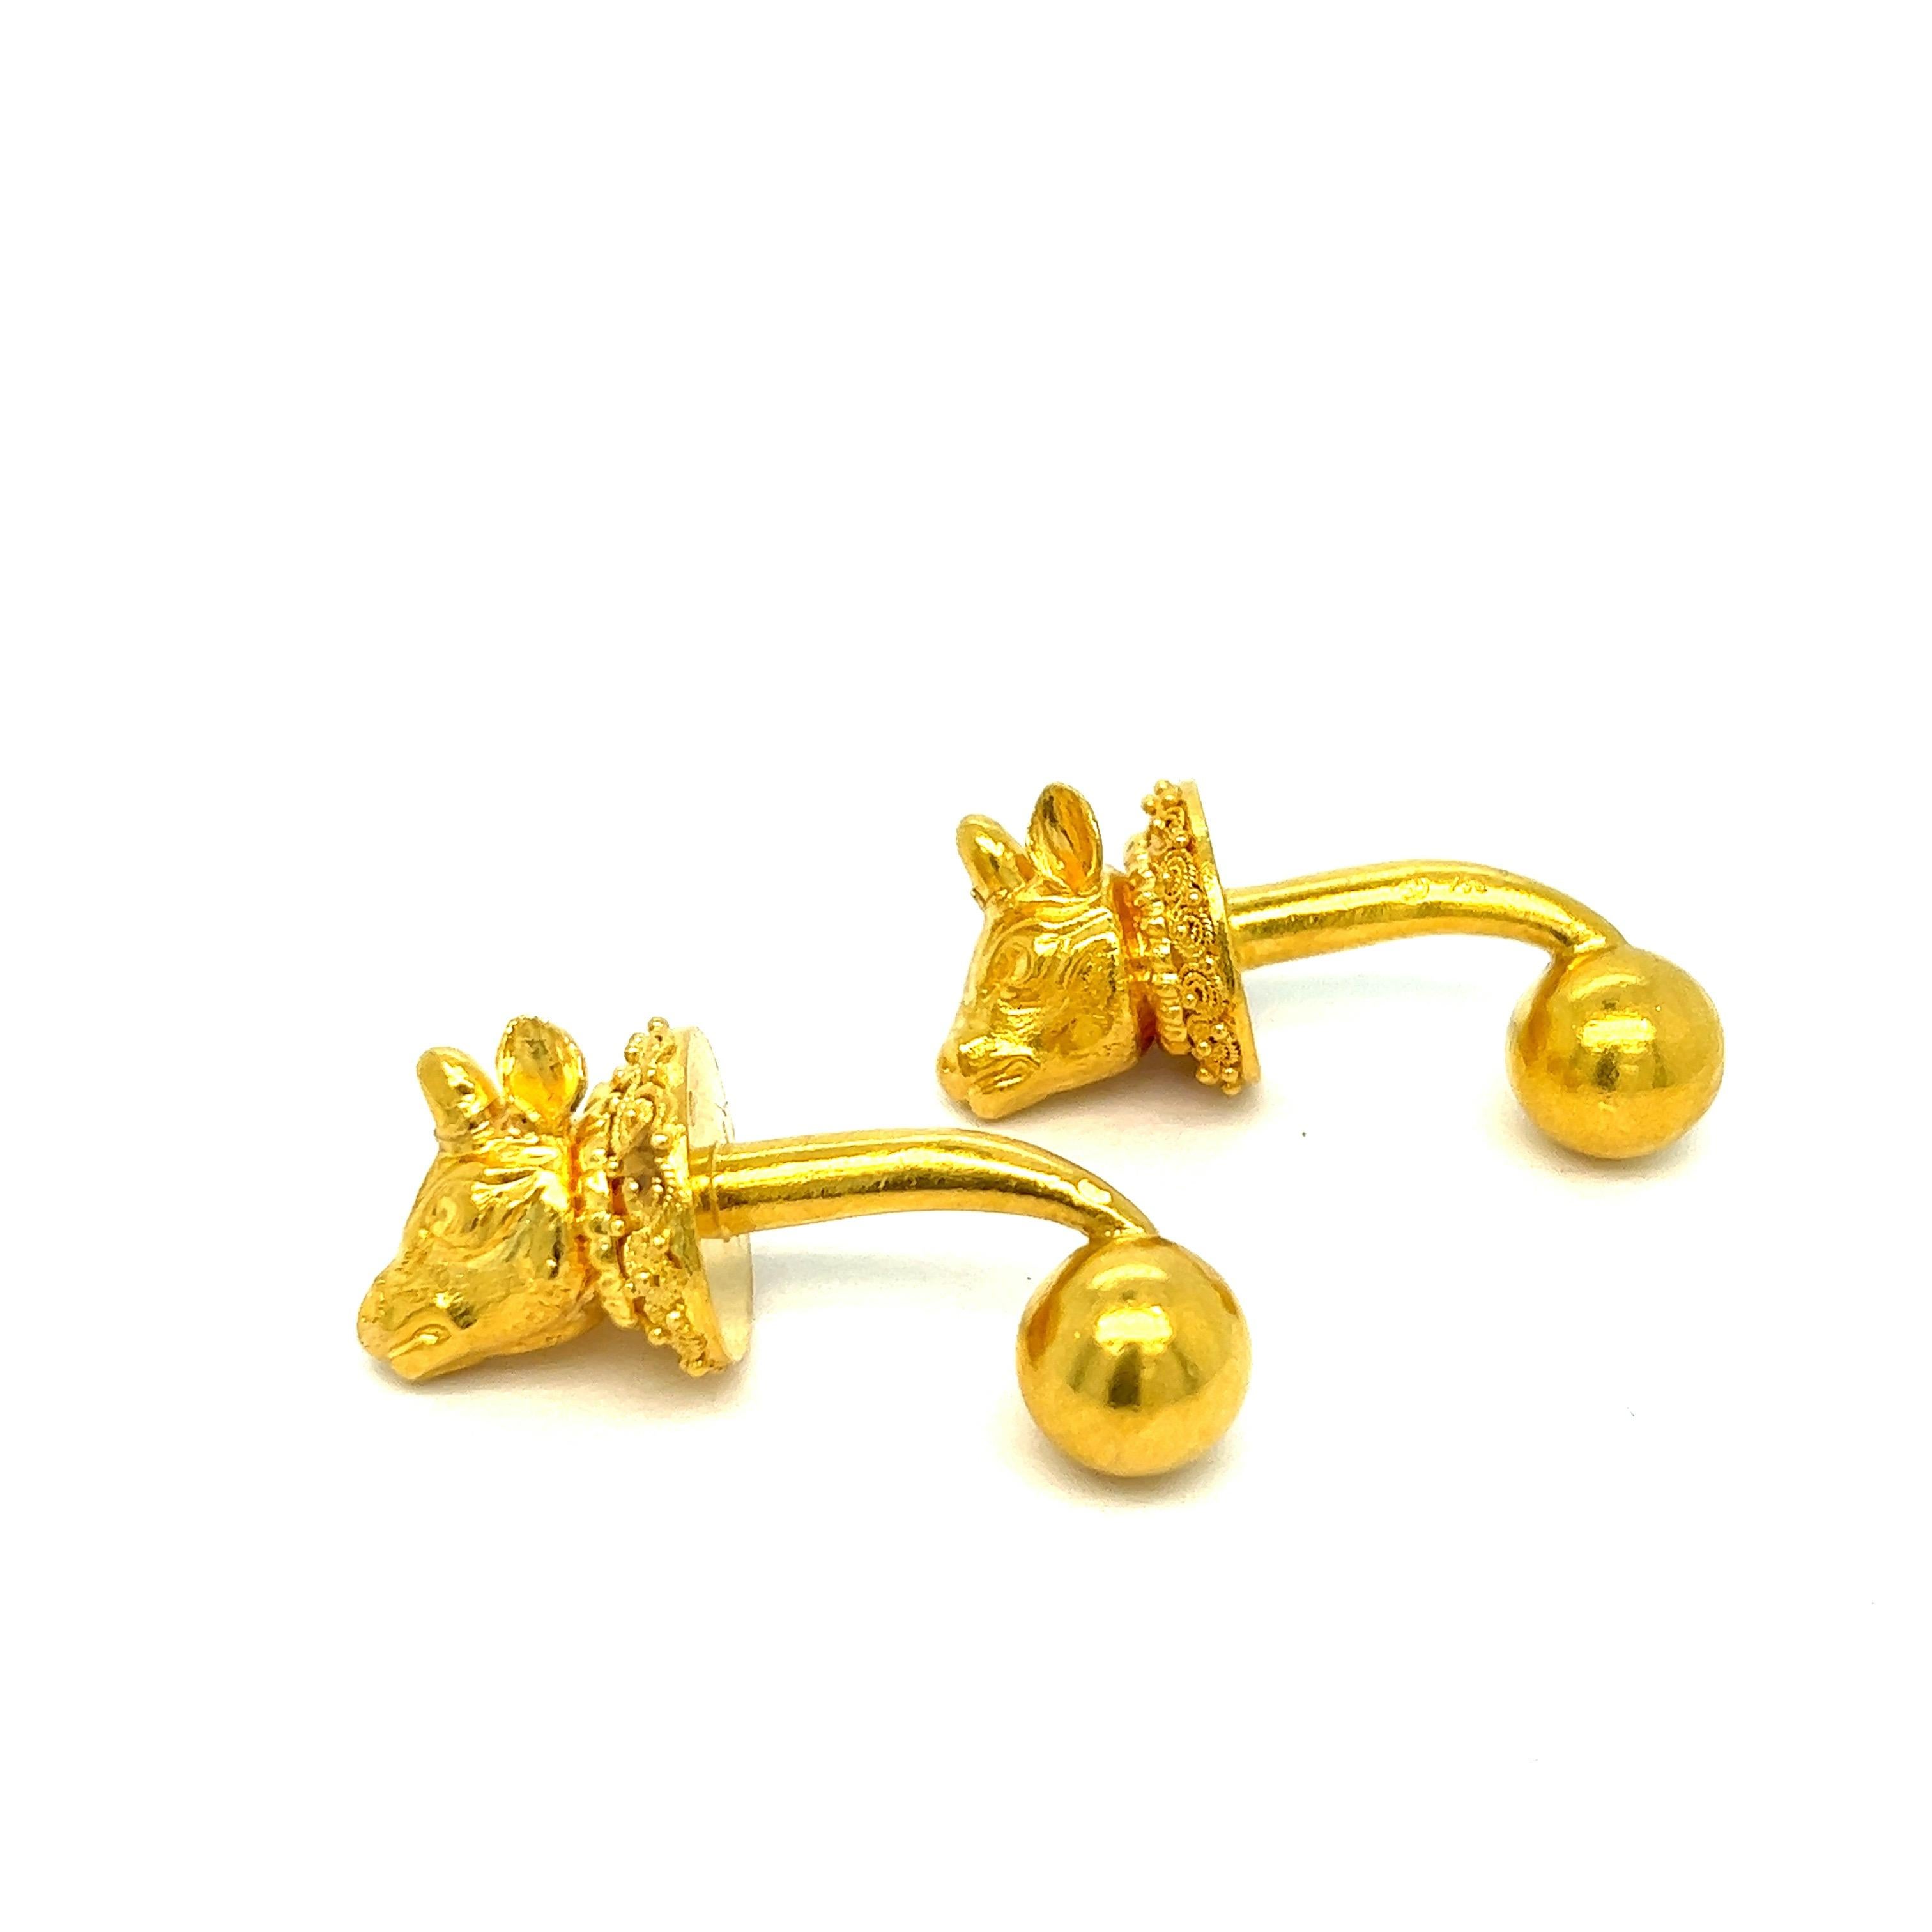 Lalaounis Bull Head Cufflinks In Excellent Condition For Sale In New York, NY